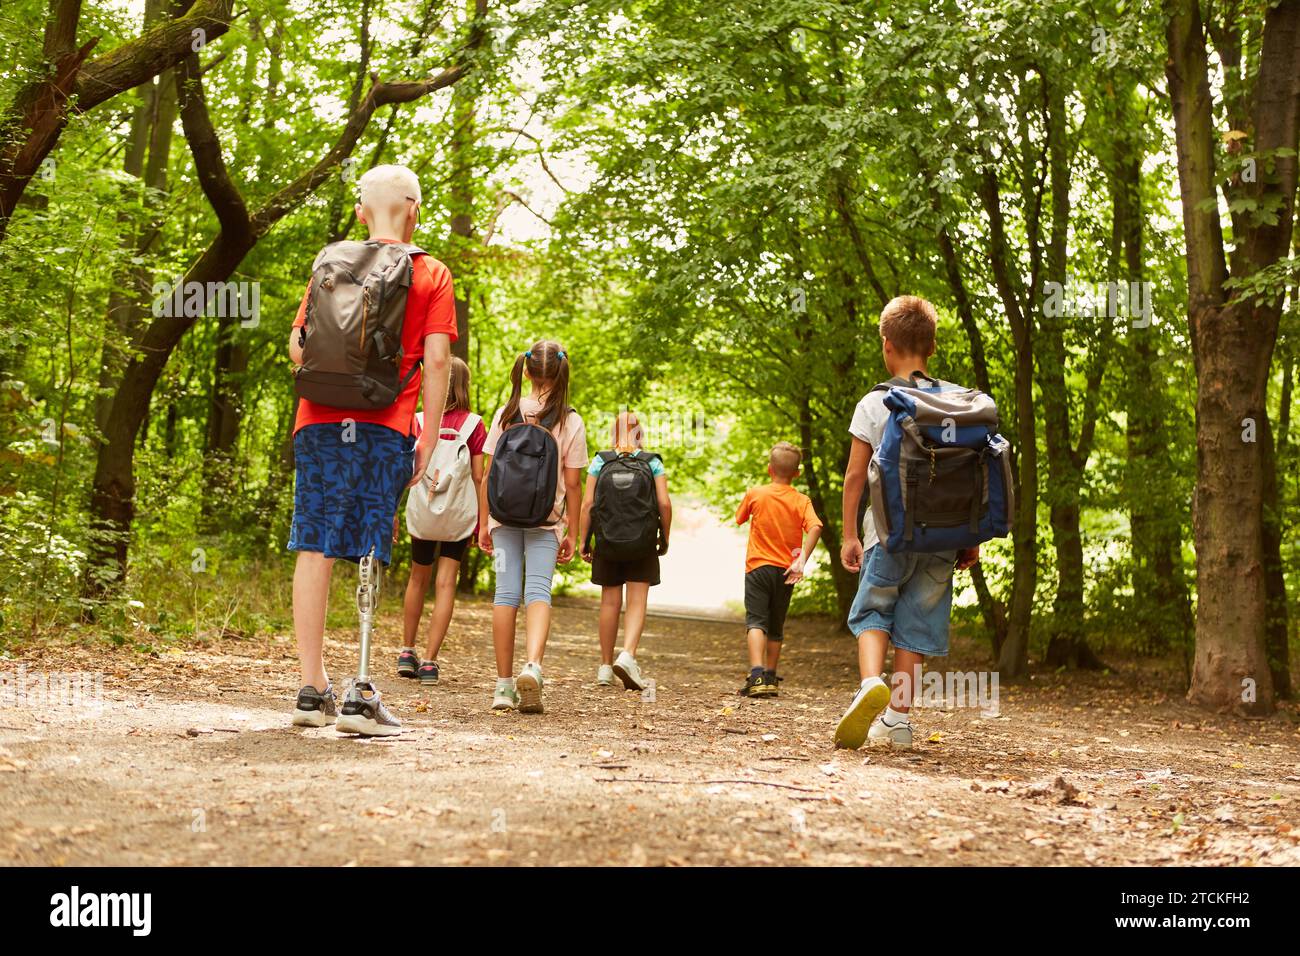 Rear view full length of kids exploring forest while waking on path Stock Photo